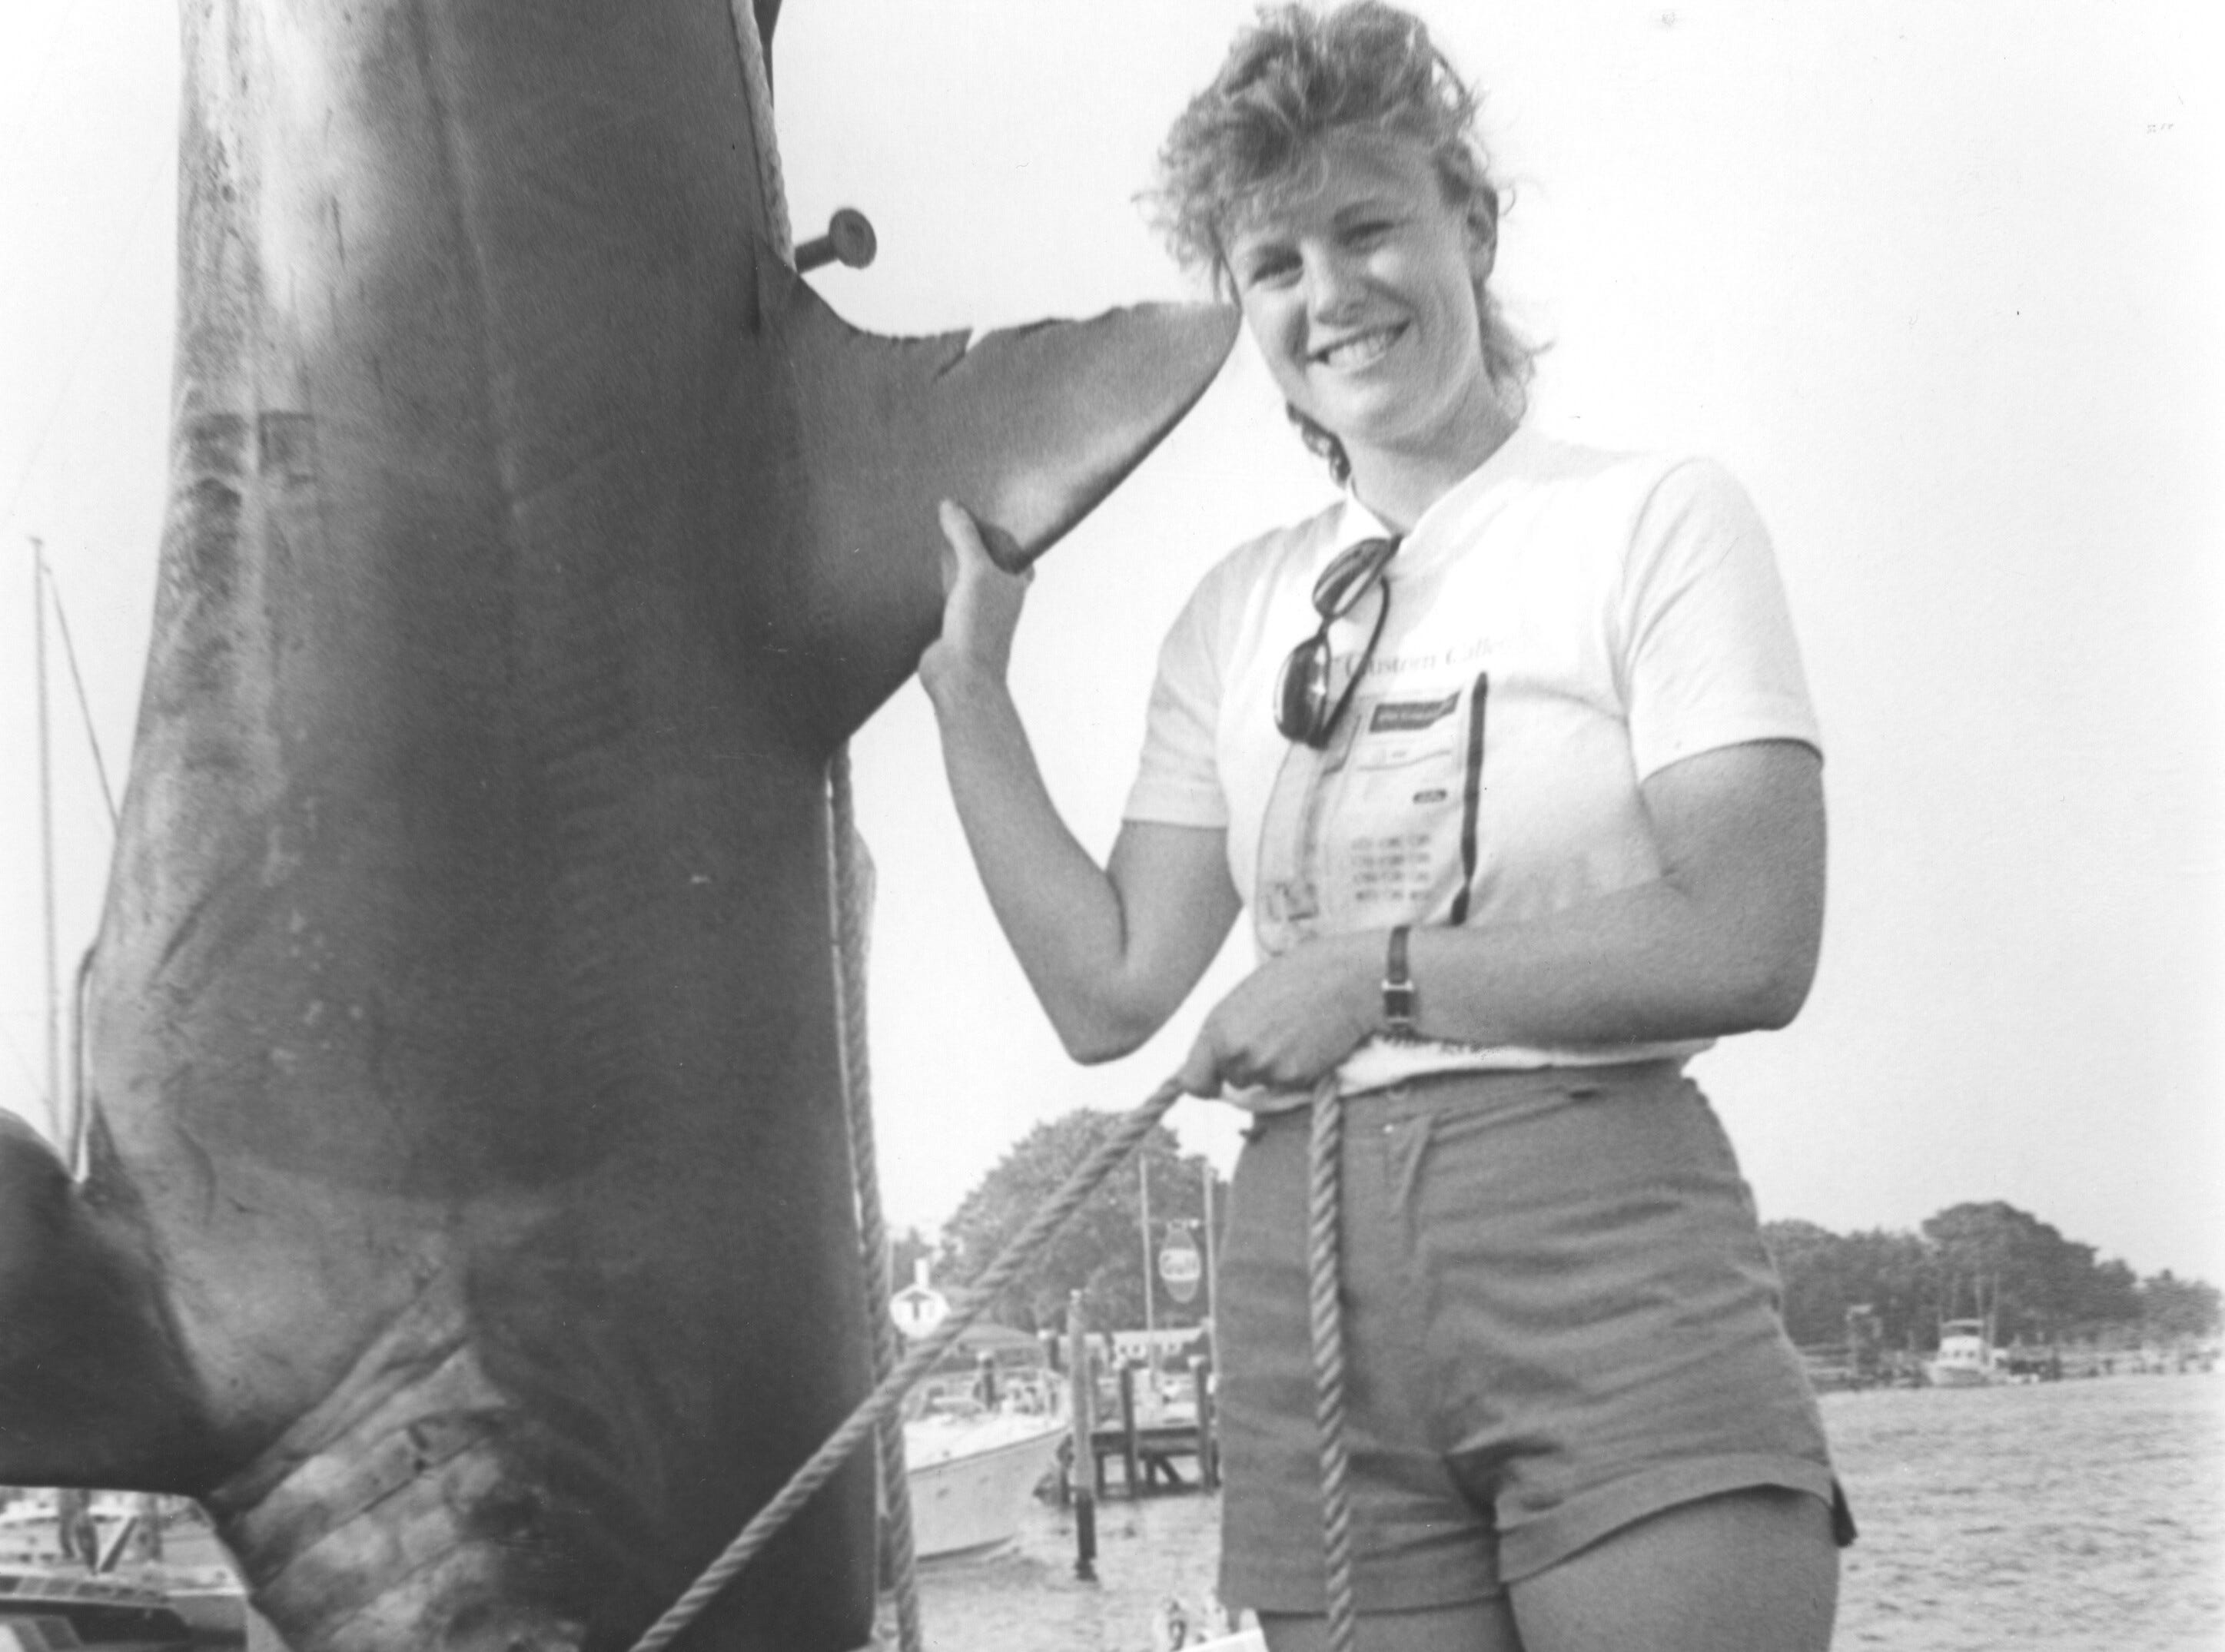 (AUG. 8, 1987) Michelle Walsh of North Brunswick Township shows a 442-pound mako shark, which was caught by fishermen aboard the Suzie Q, out of Point Beach, some 16 miles off Manasquan Inlet.